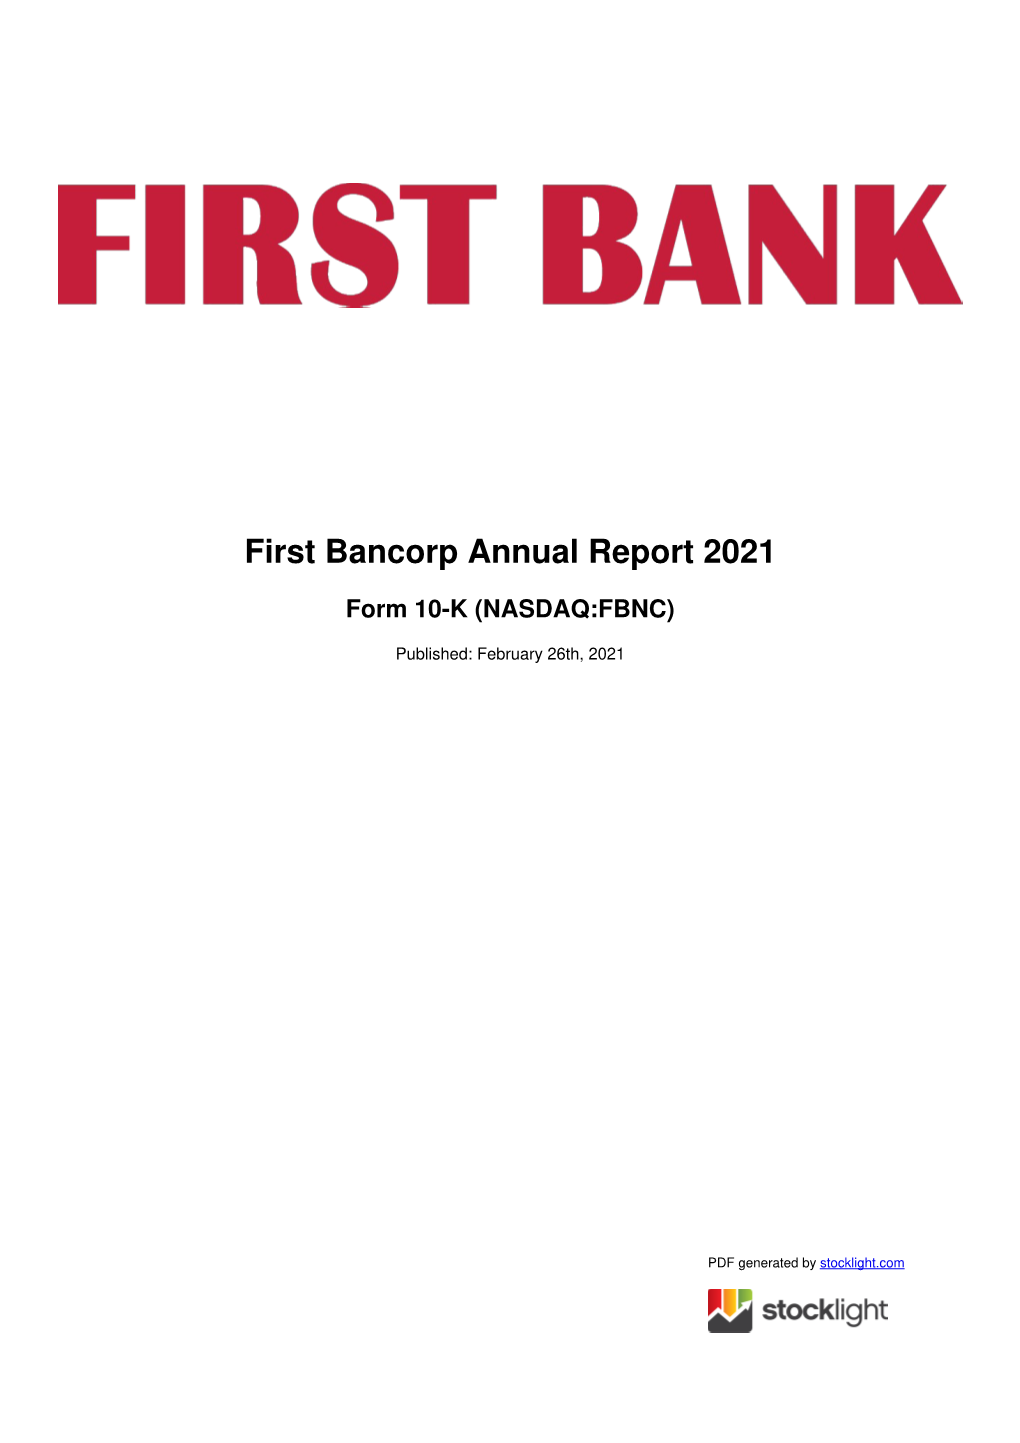 First Bancorp Annual Report 2021